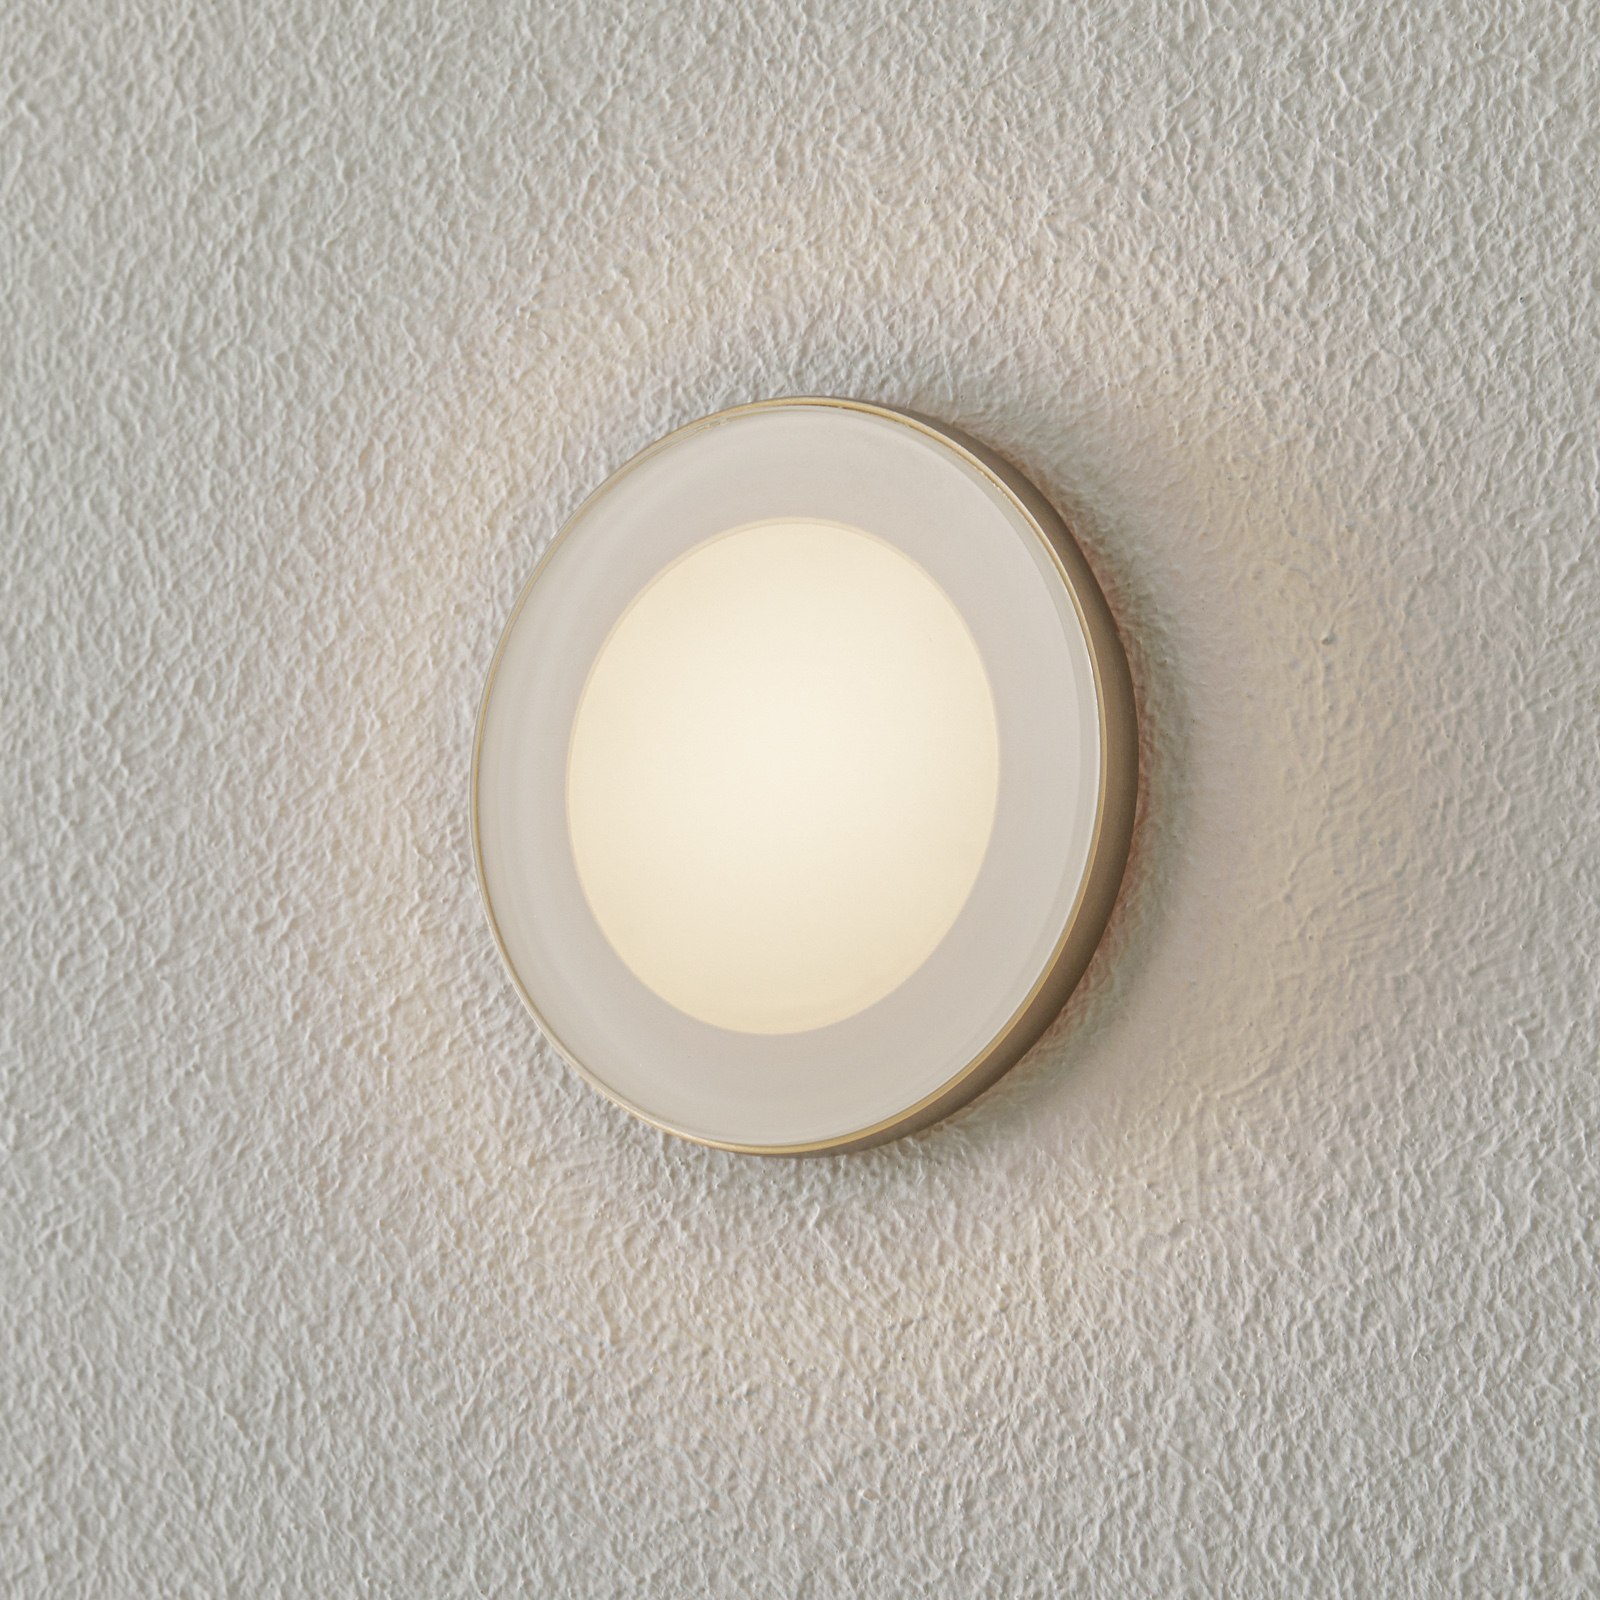 BEGA Accenta wall recessed round Ring stainless steel 160lm